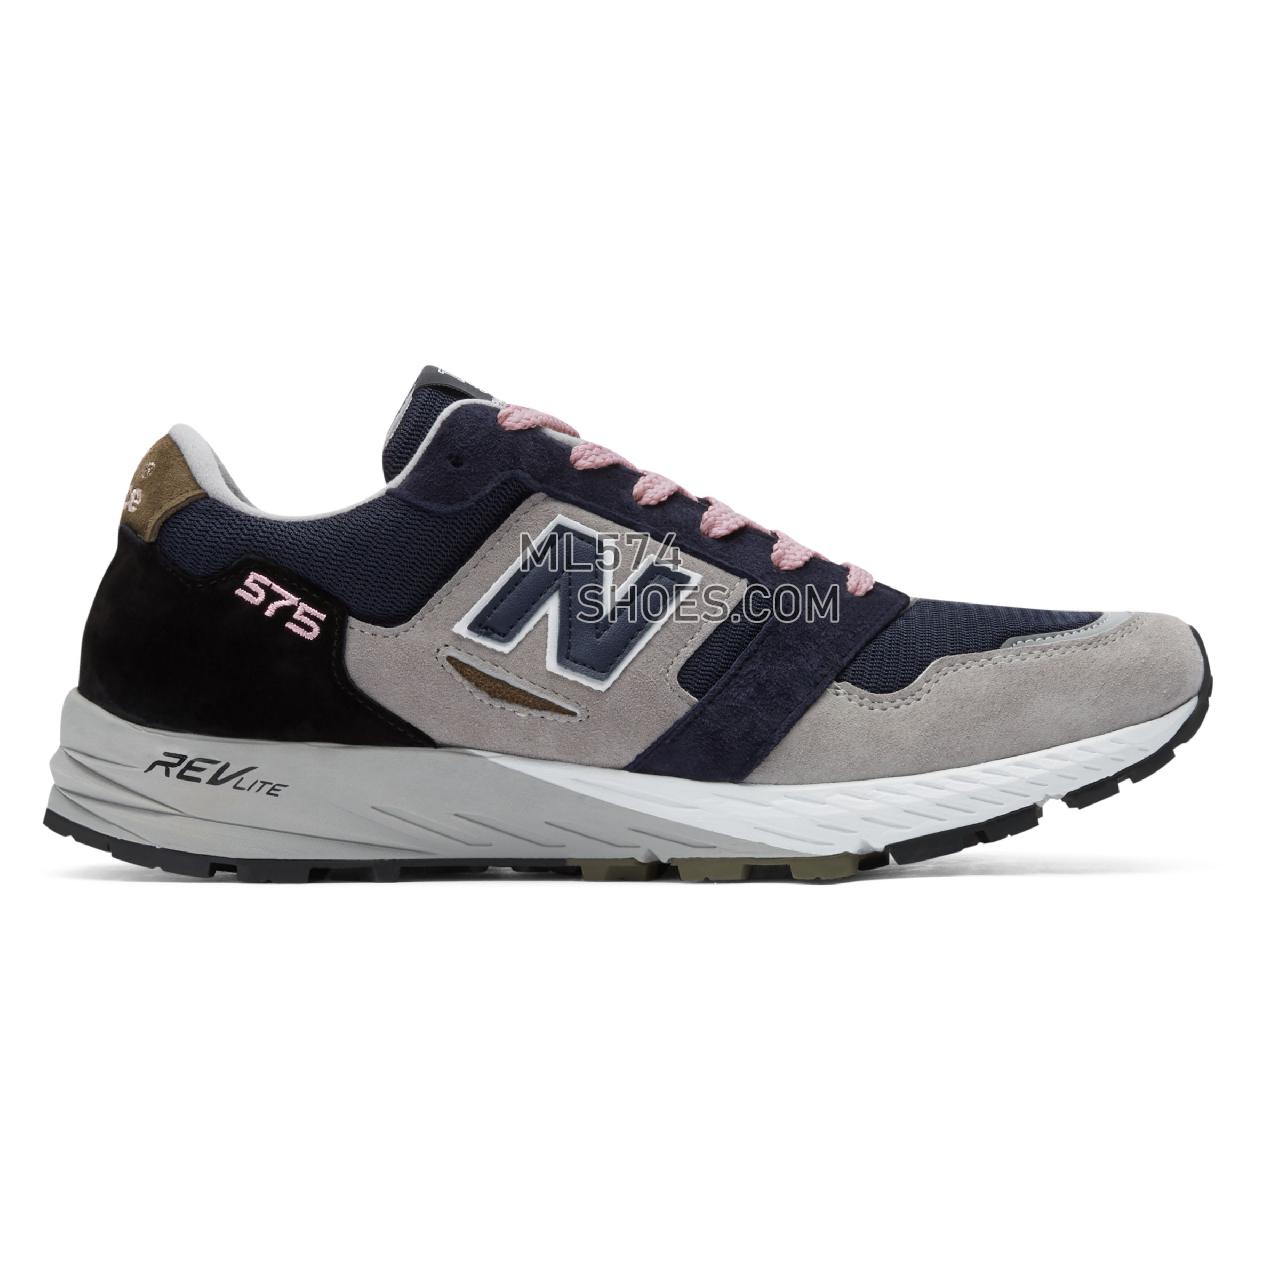 New Balance Made in UK 575 Soft Haze - Men's Made in UK 575 Soft Haze Classic - Grey with Navy and Lilac - MTL575NL